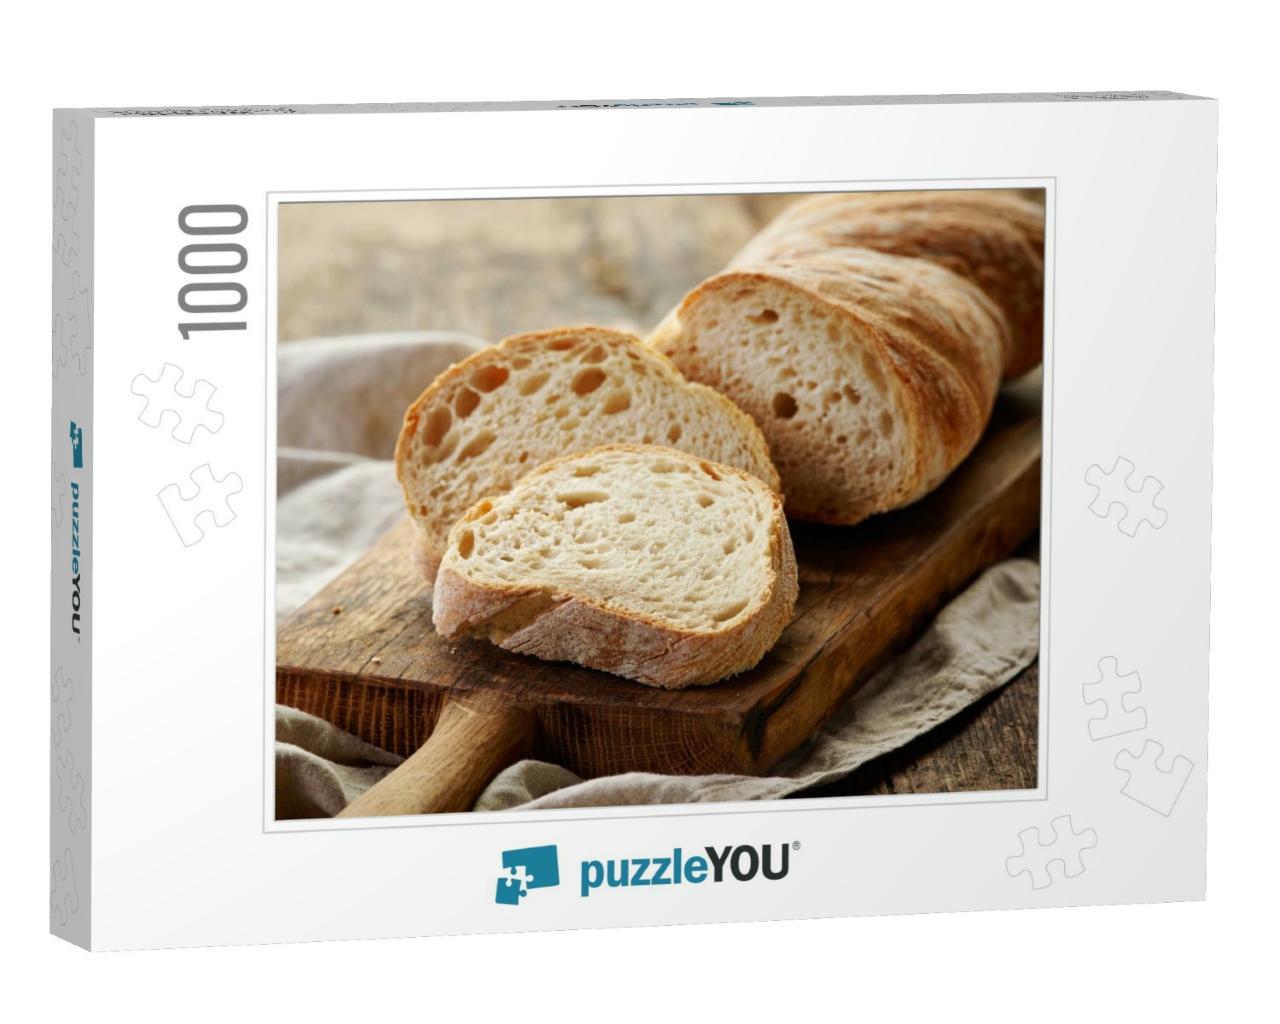 Freshly Baked Ciabatta Bread on Wooden Cutting Board... Jigsaw Puzzle with 1000 pieces